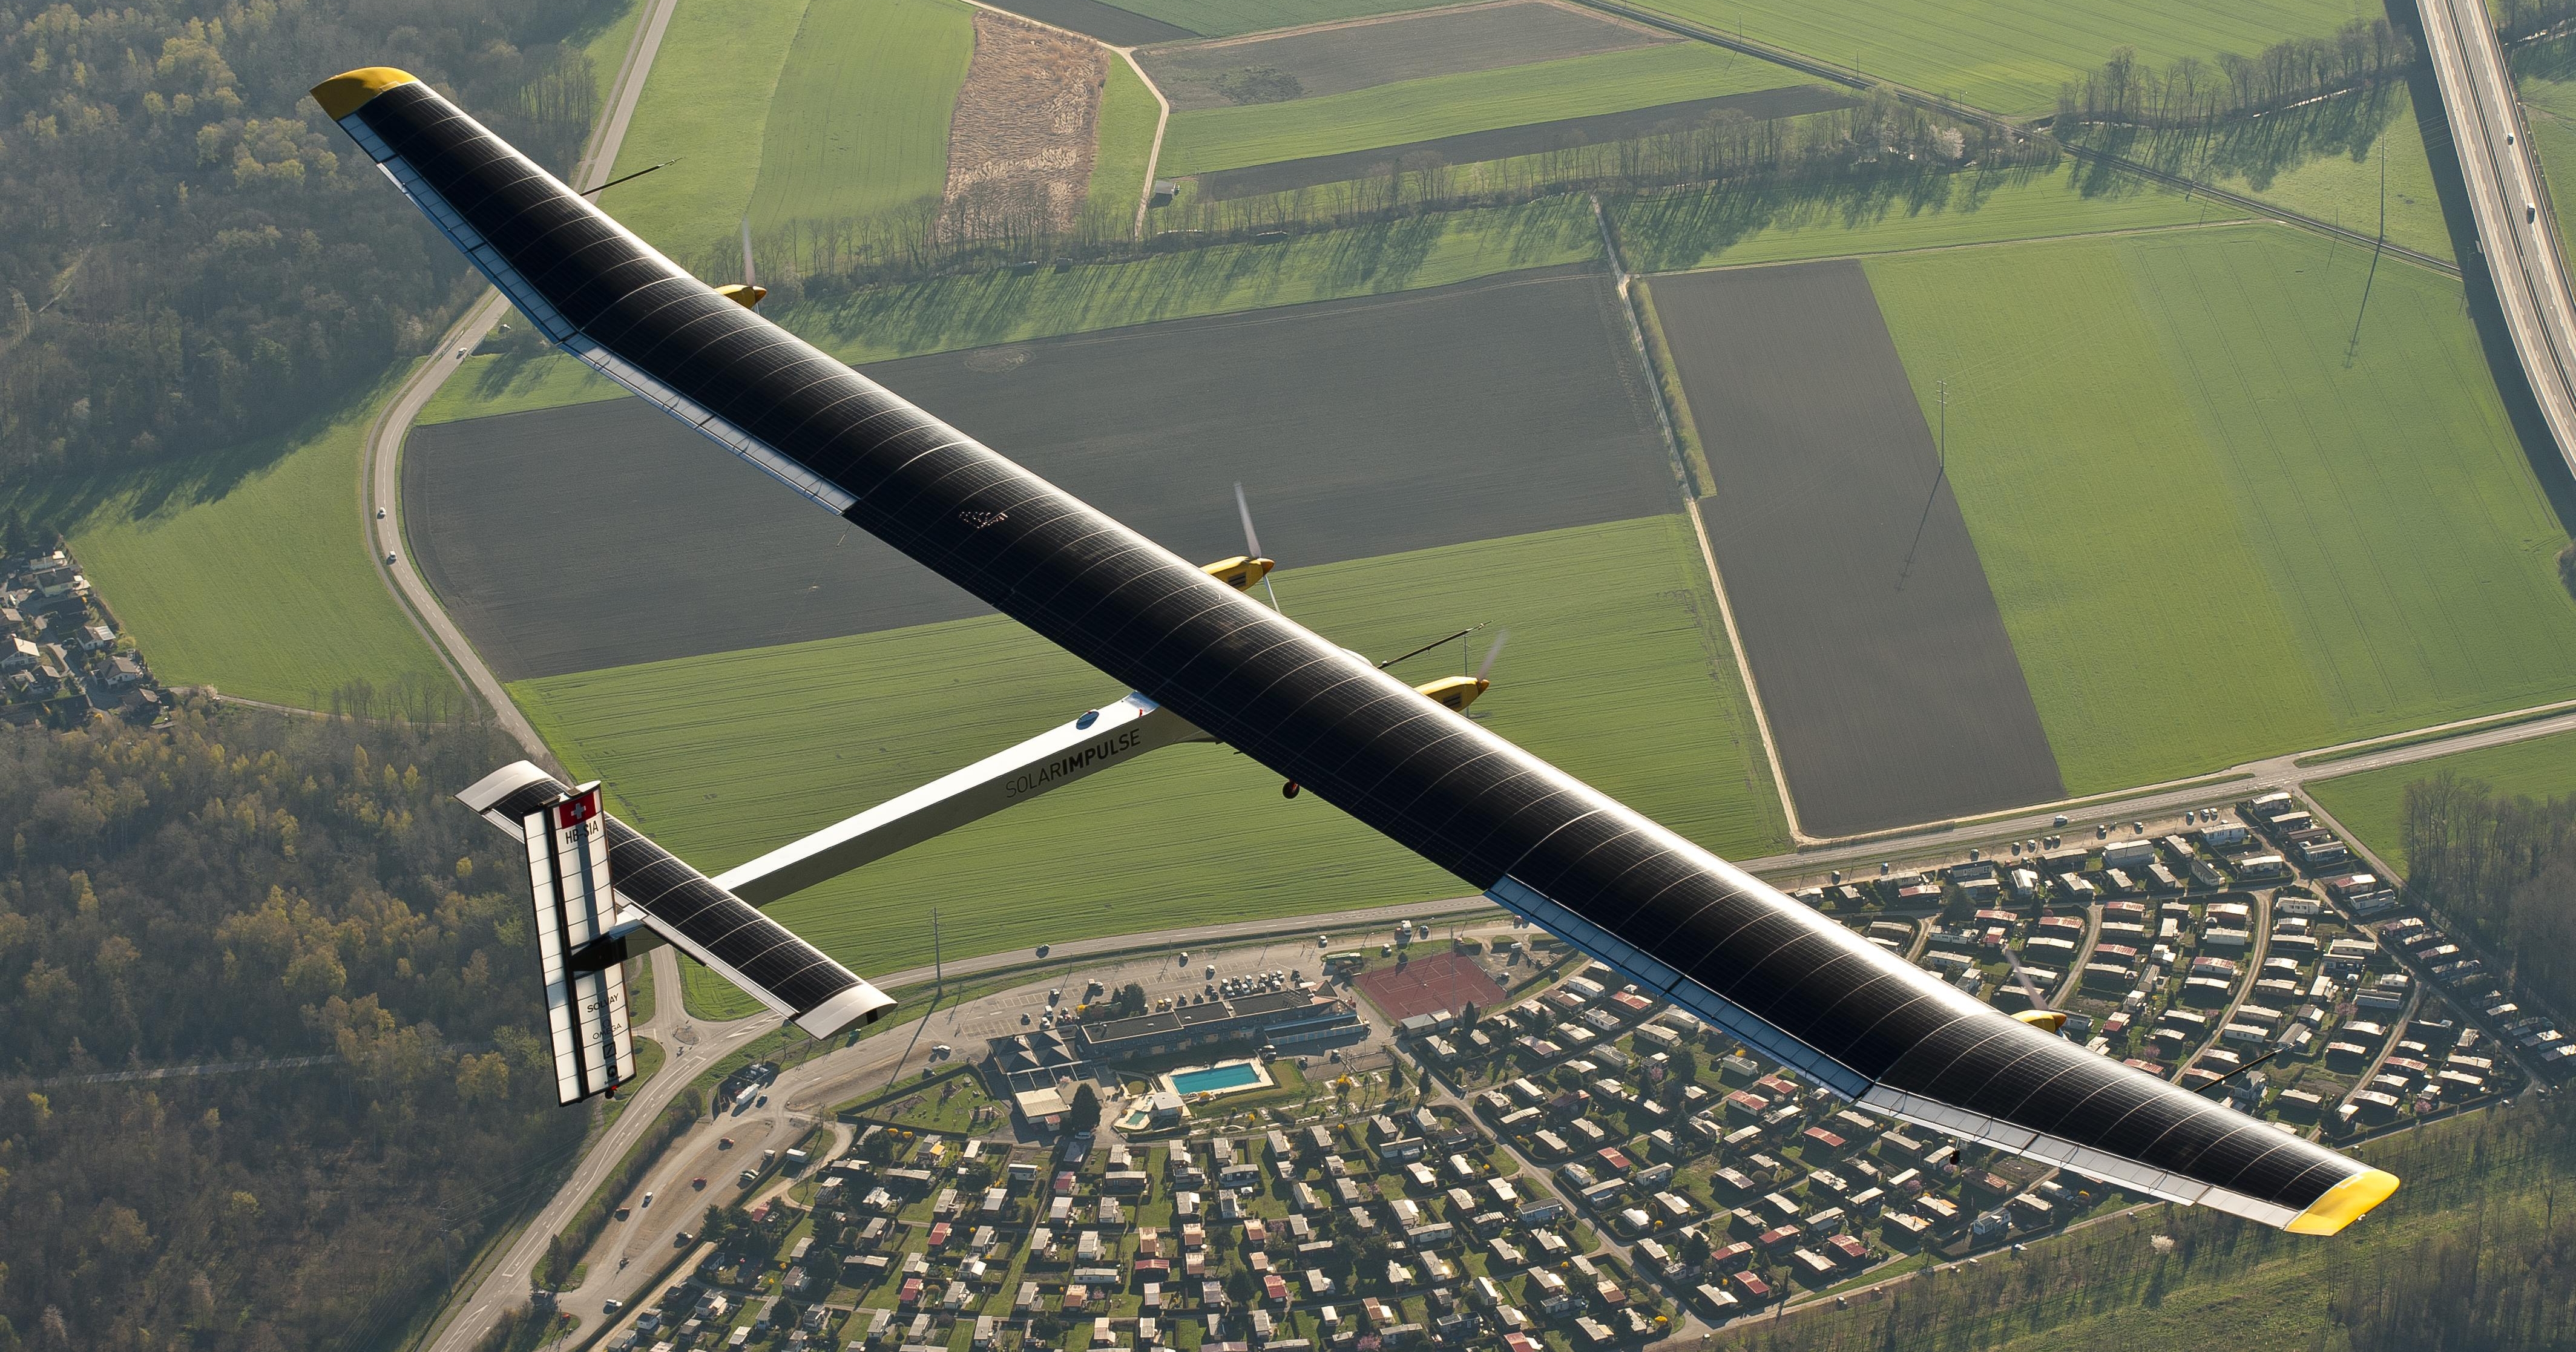 Solar Impulse 2, The First Solar-Powered Plane On A Trip Around The World  Completes Pacific Crossing